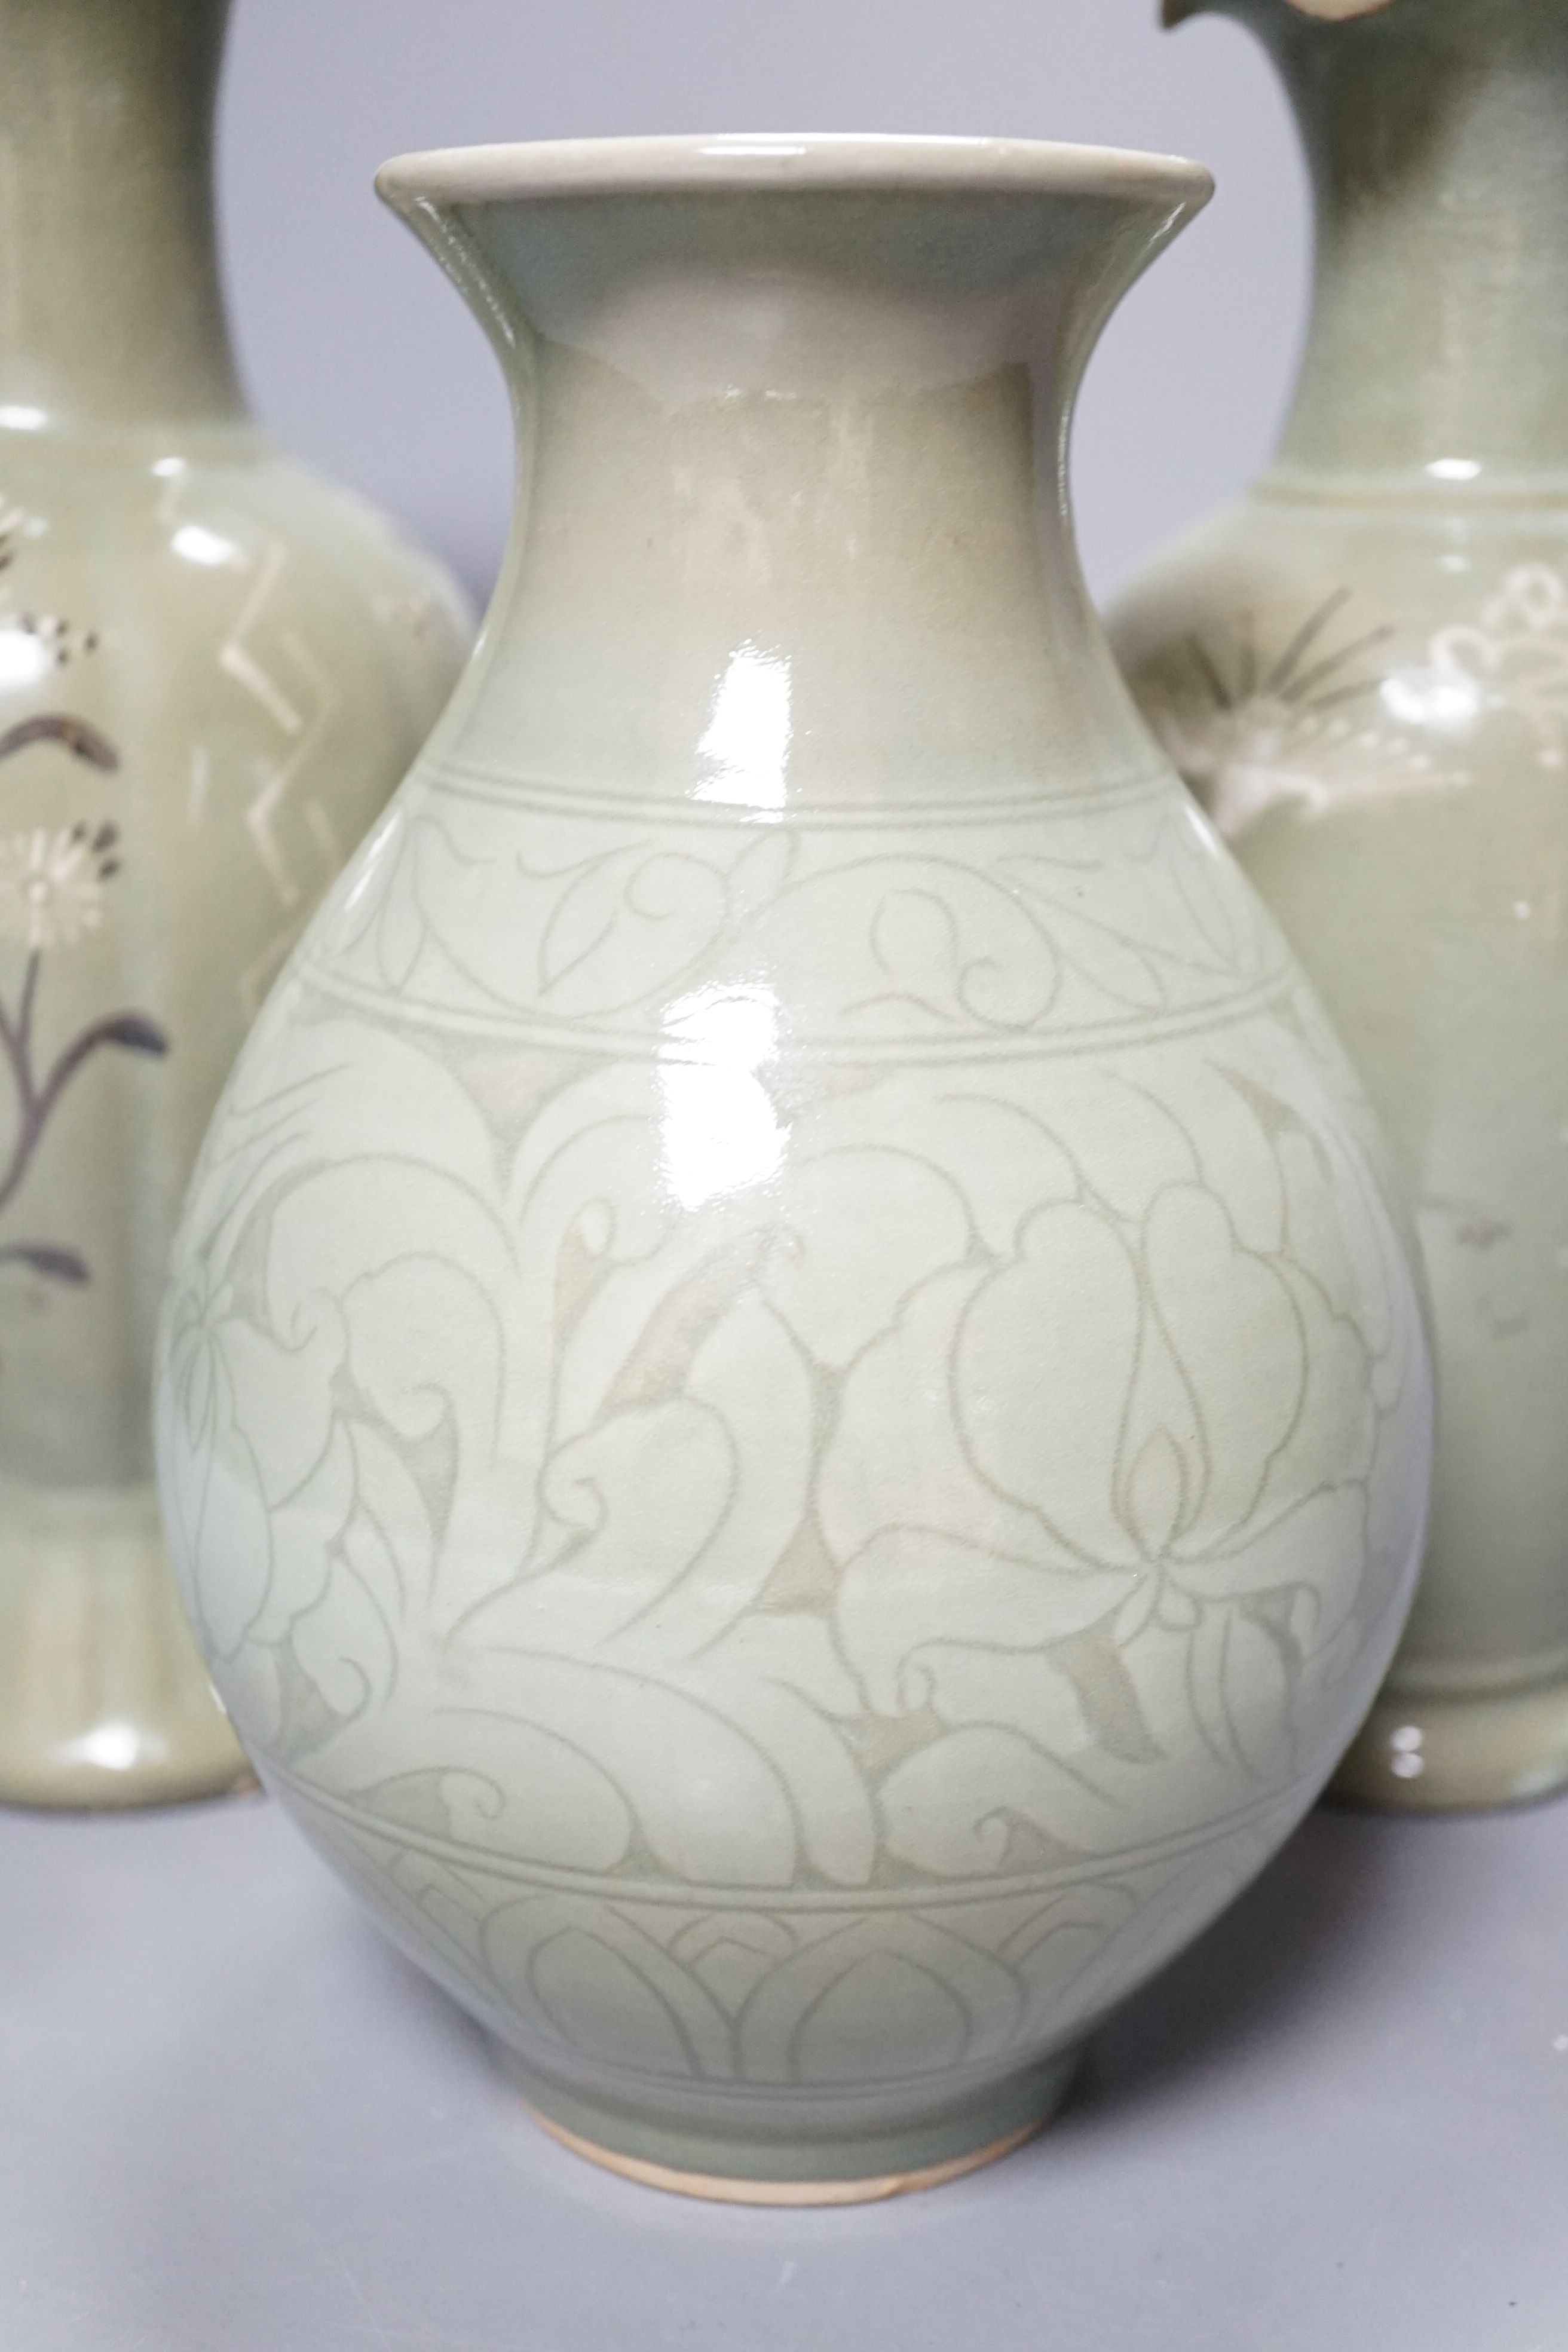 Mixed oriental wares including a Chinese arrow vase 32cm, ‘orean celadon vases and a Kutani type dish